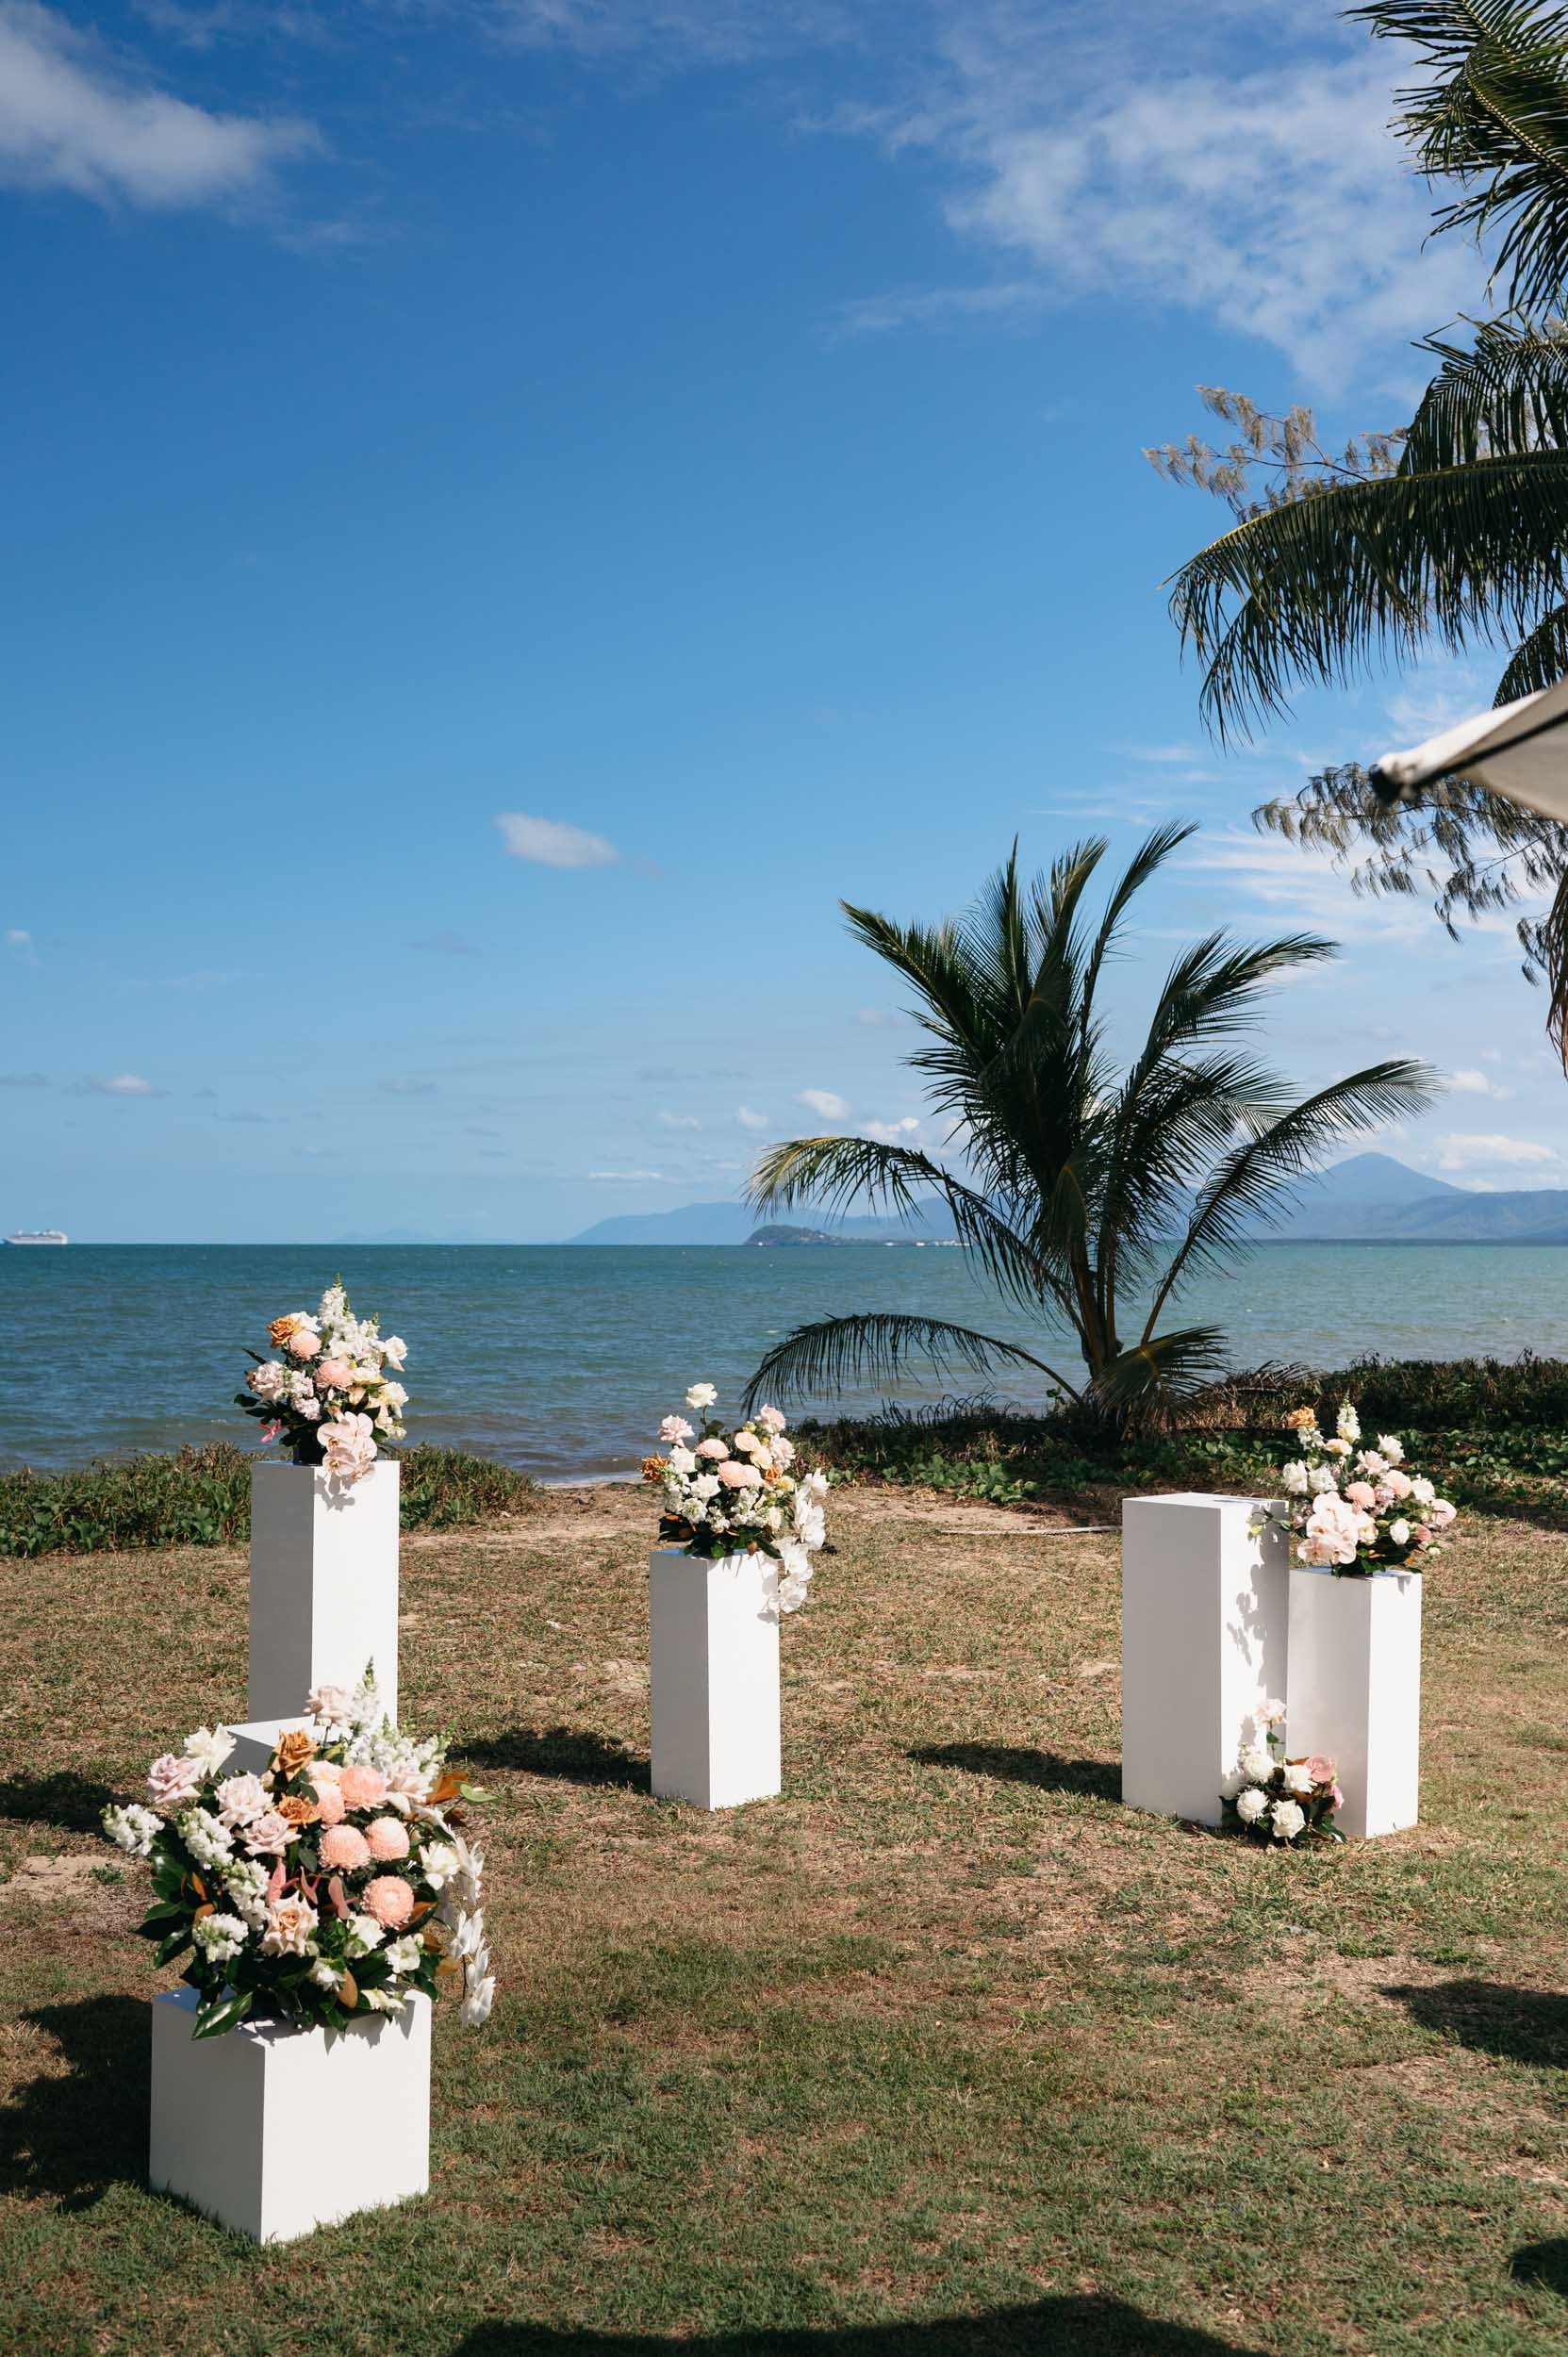 The Raw Photographer - Cairns Wedding Photographer - Port Douglas ceremony venues and locations-2.jpg